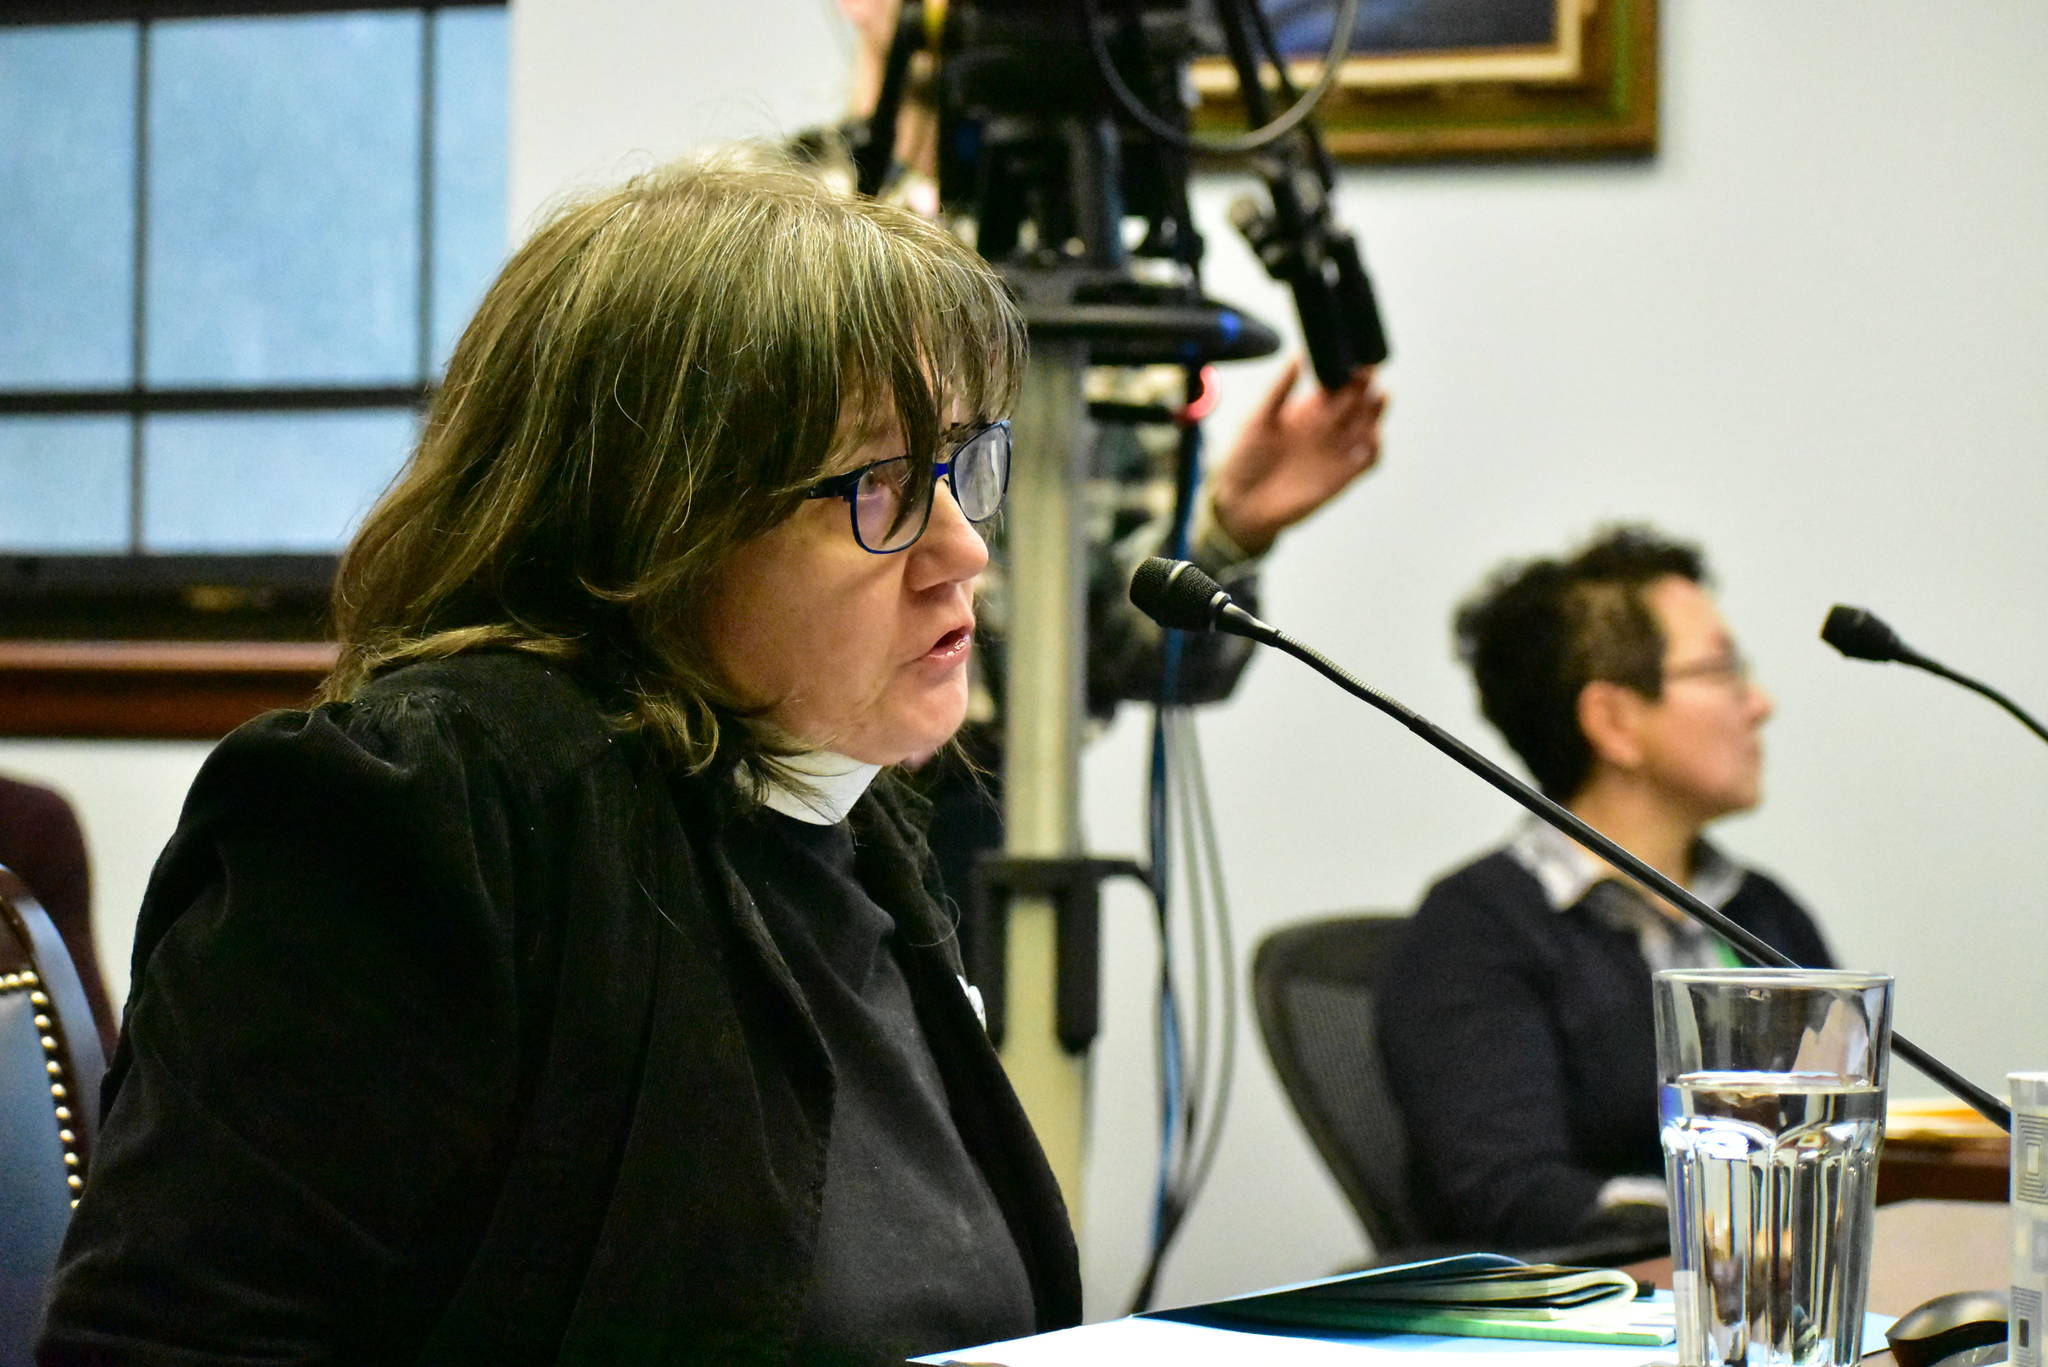 Rev. Caroline Malseed, priest-in-charge at St. Brendan’s Episcopal Church in Juneau give testimony against SJR 13 on Wednesday, Feb. 26, 2020. (Peter Segall | Juneau Empire)